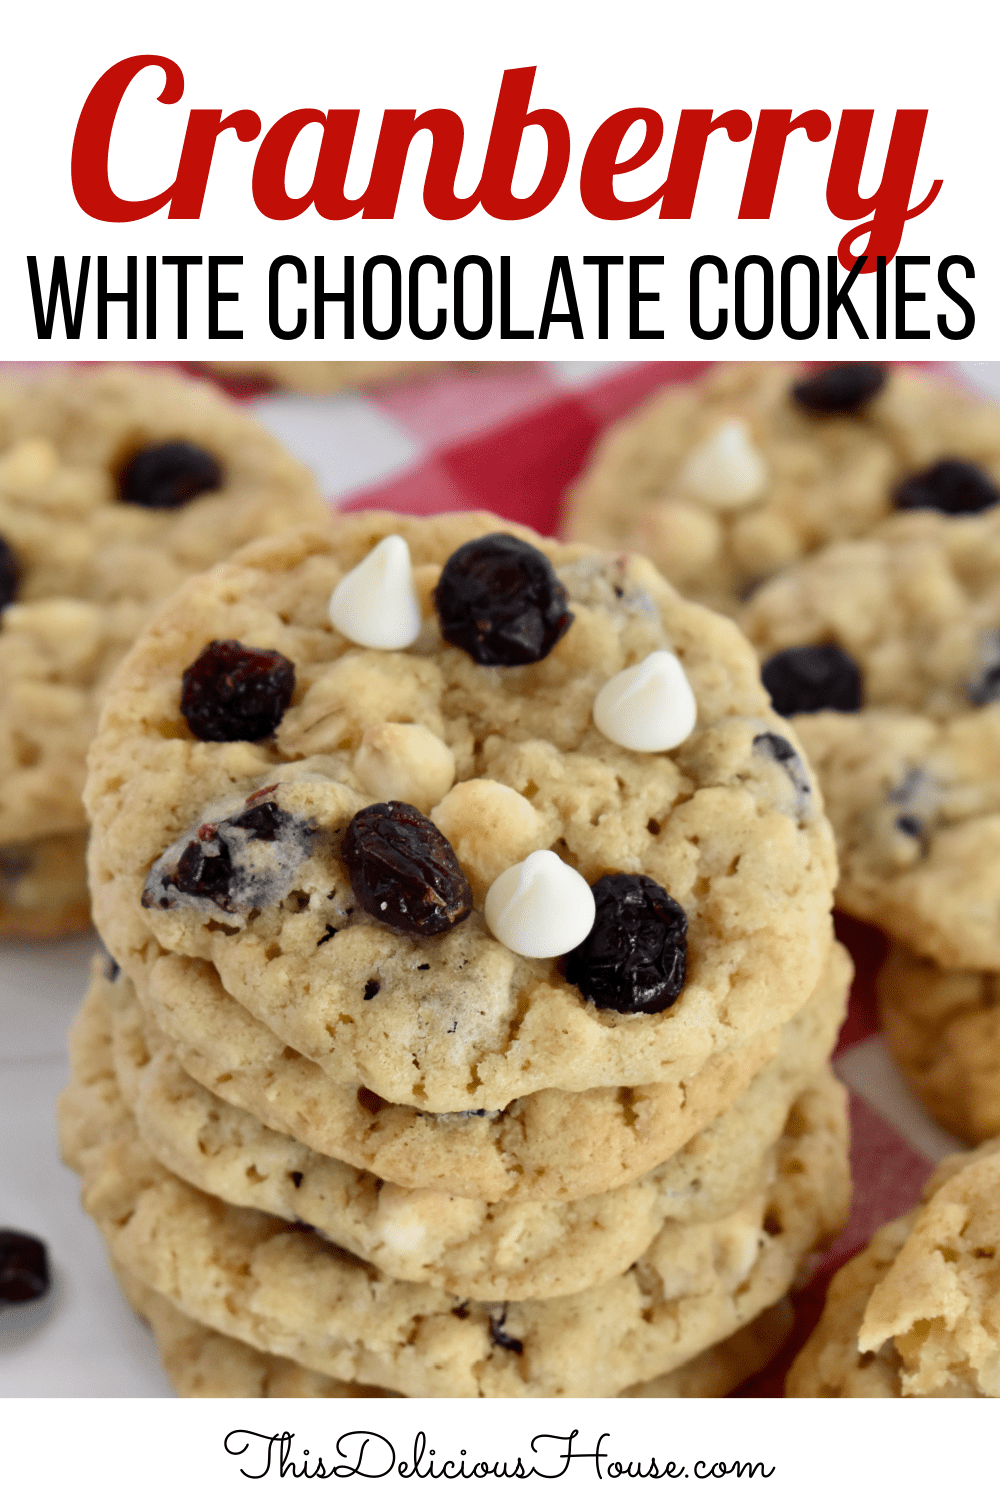 White Chocolate Cranberry cookies. 